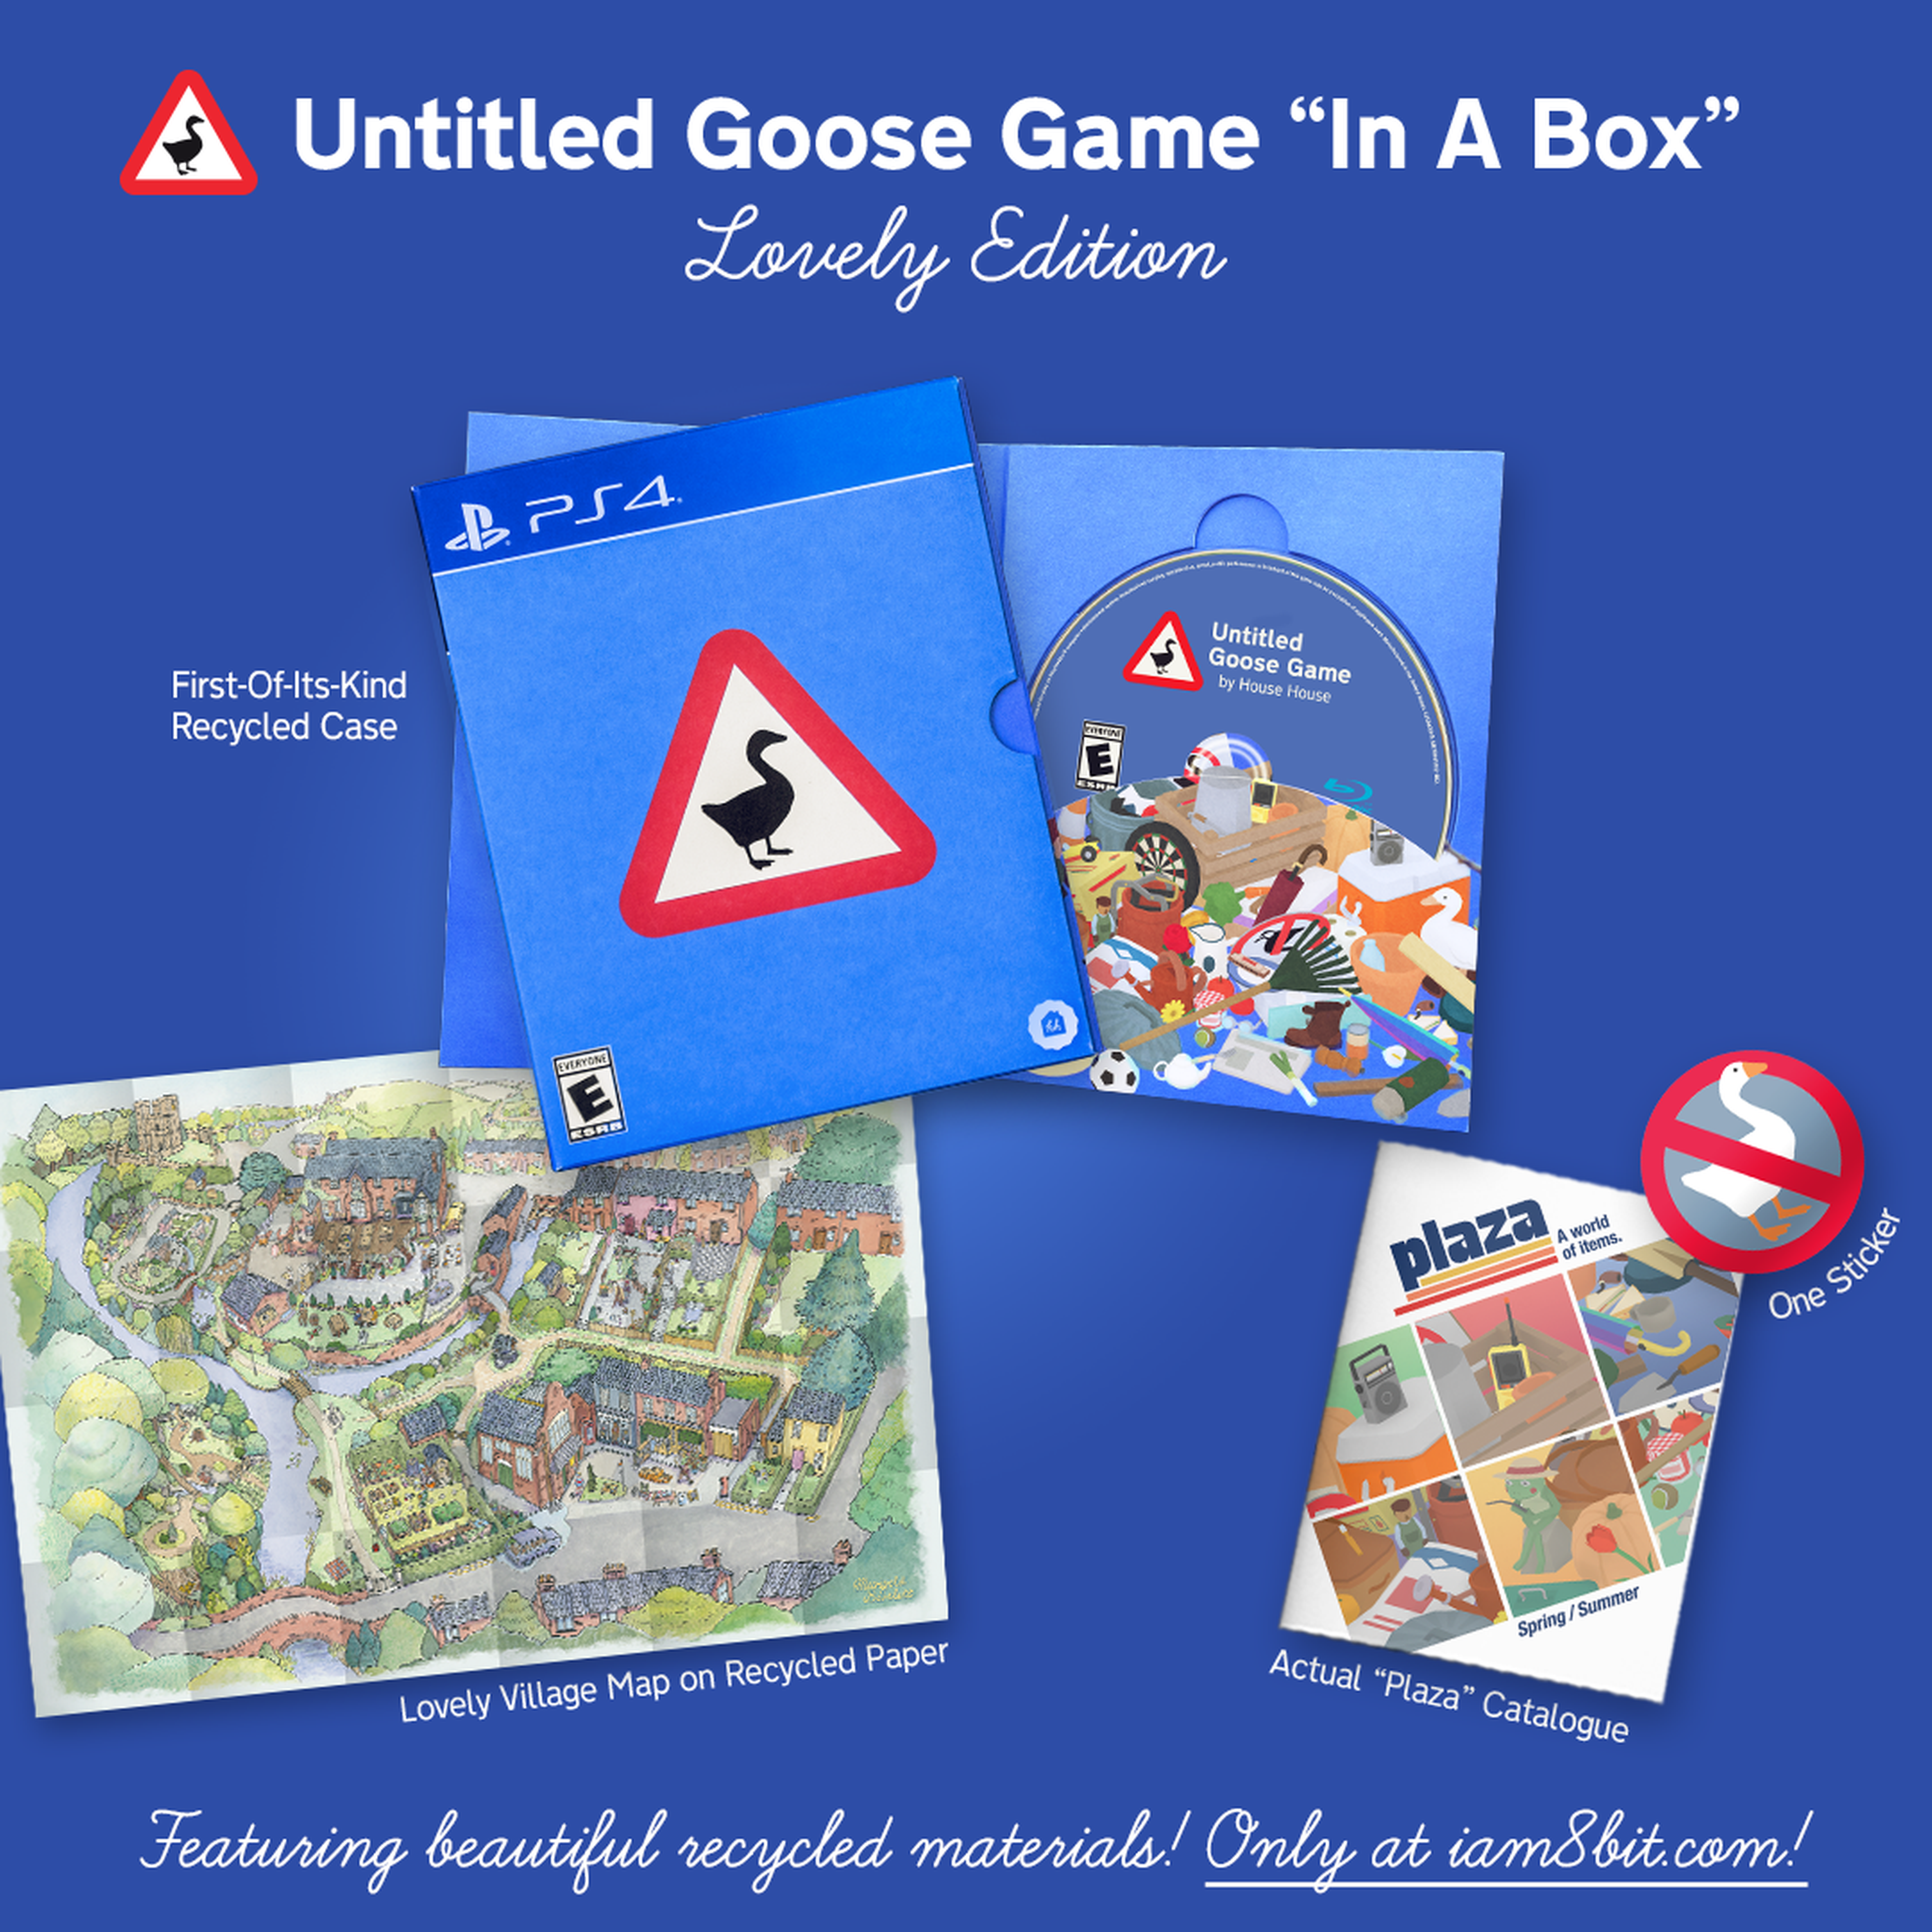 Untitled Goose Game by Baity Rose